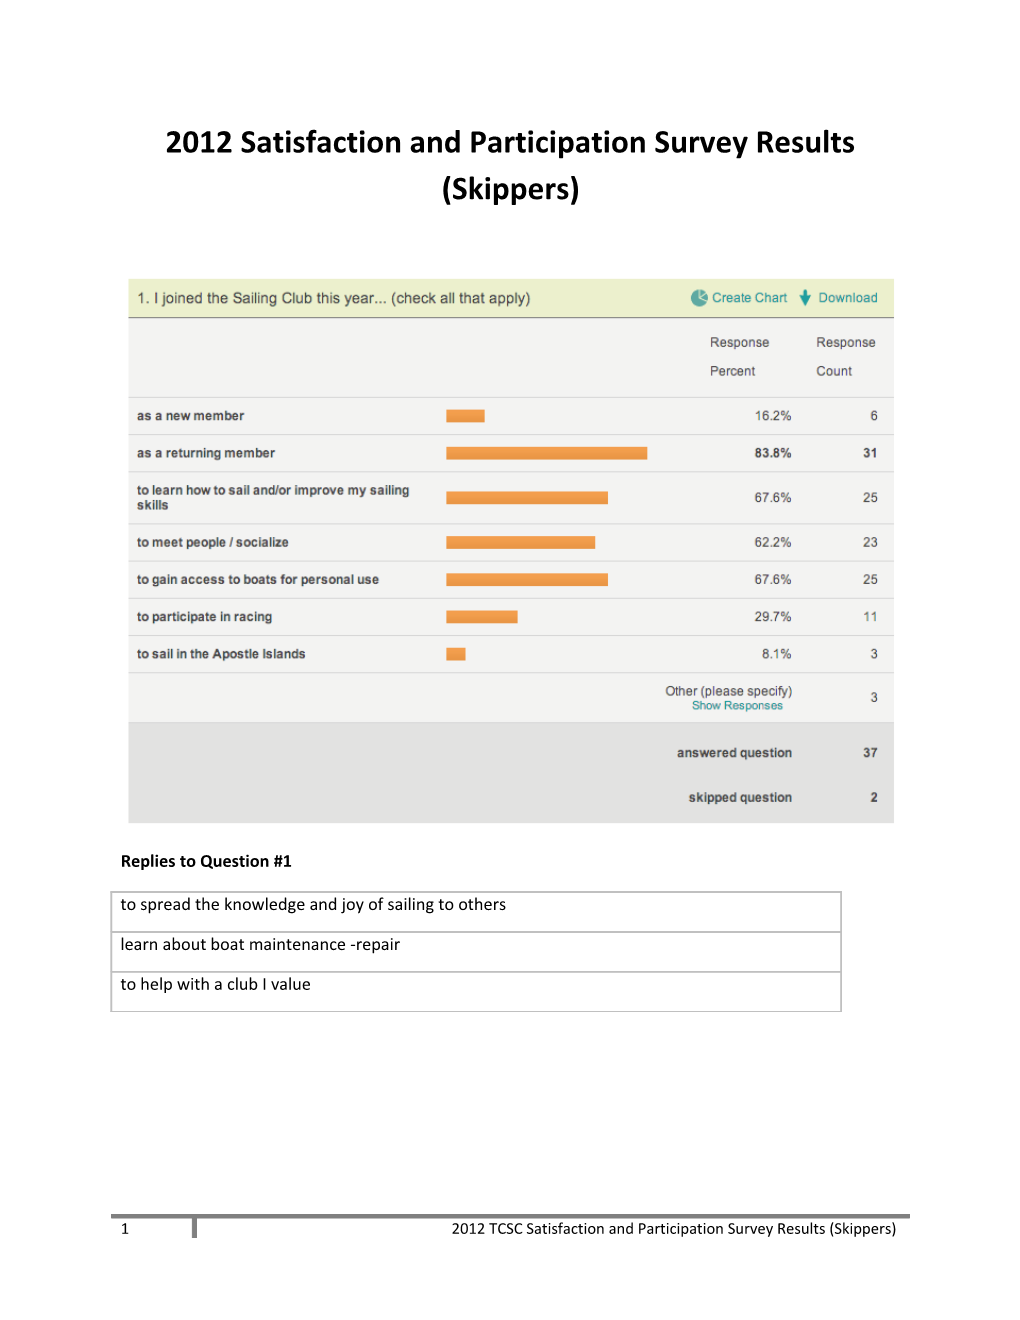 2012 Satisfaction and Participation Survey Results (Skippers)